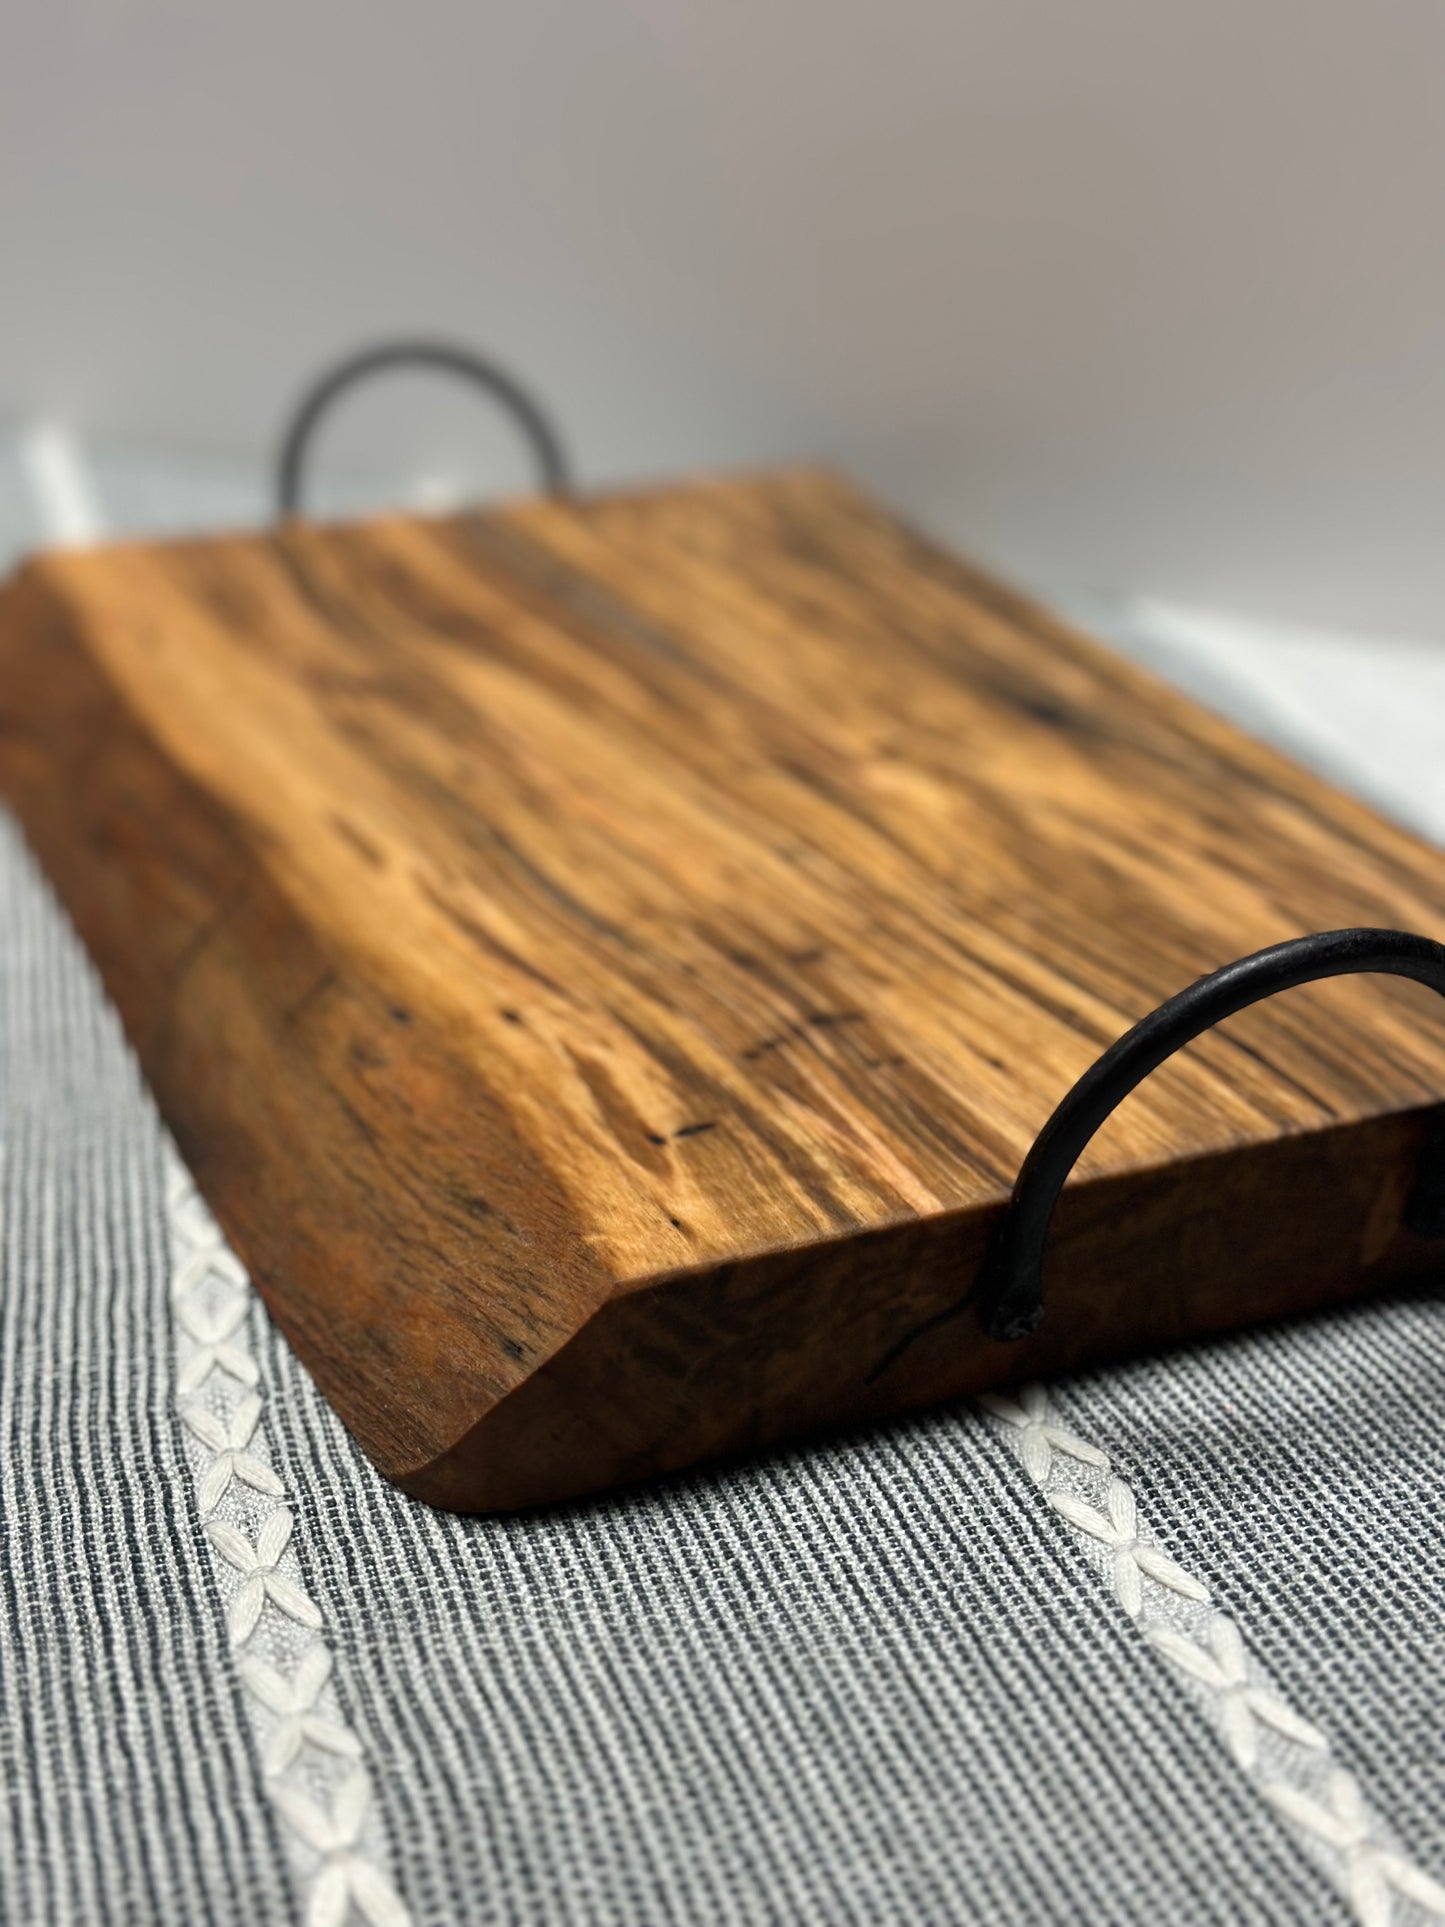 Spalted Maple Tray with hand forged handles